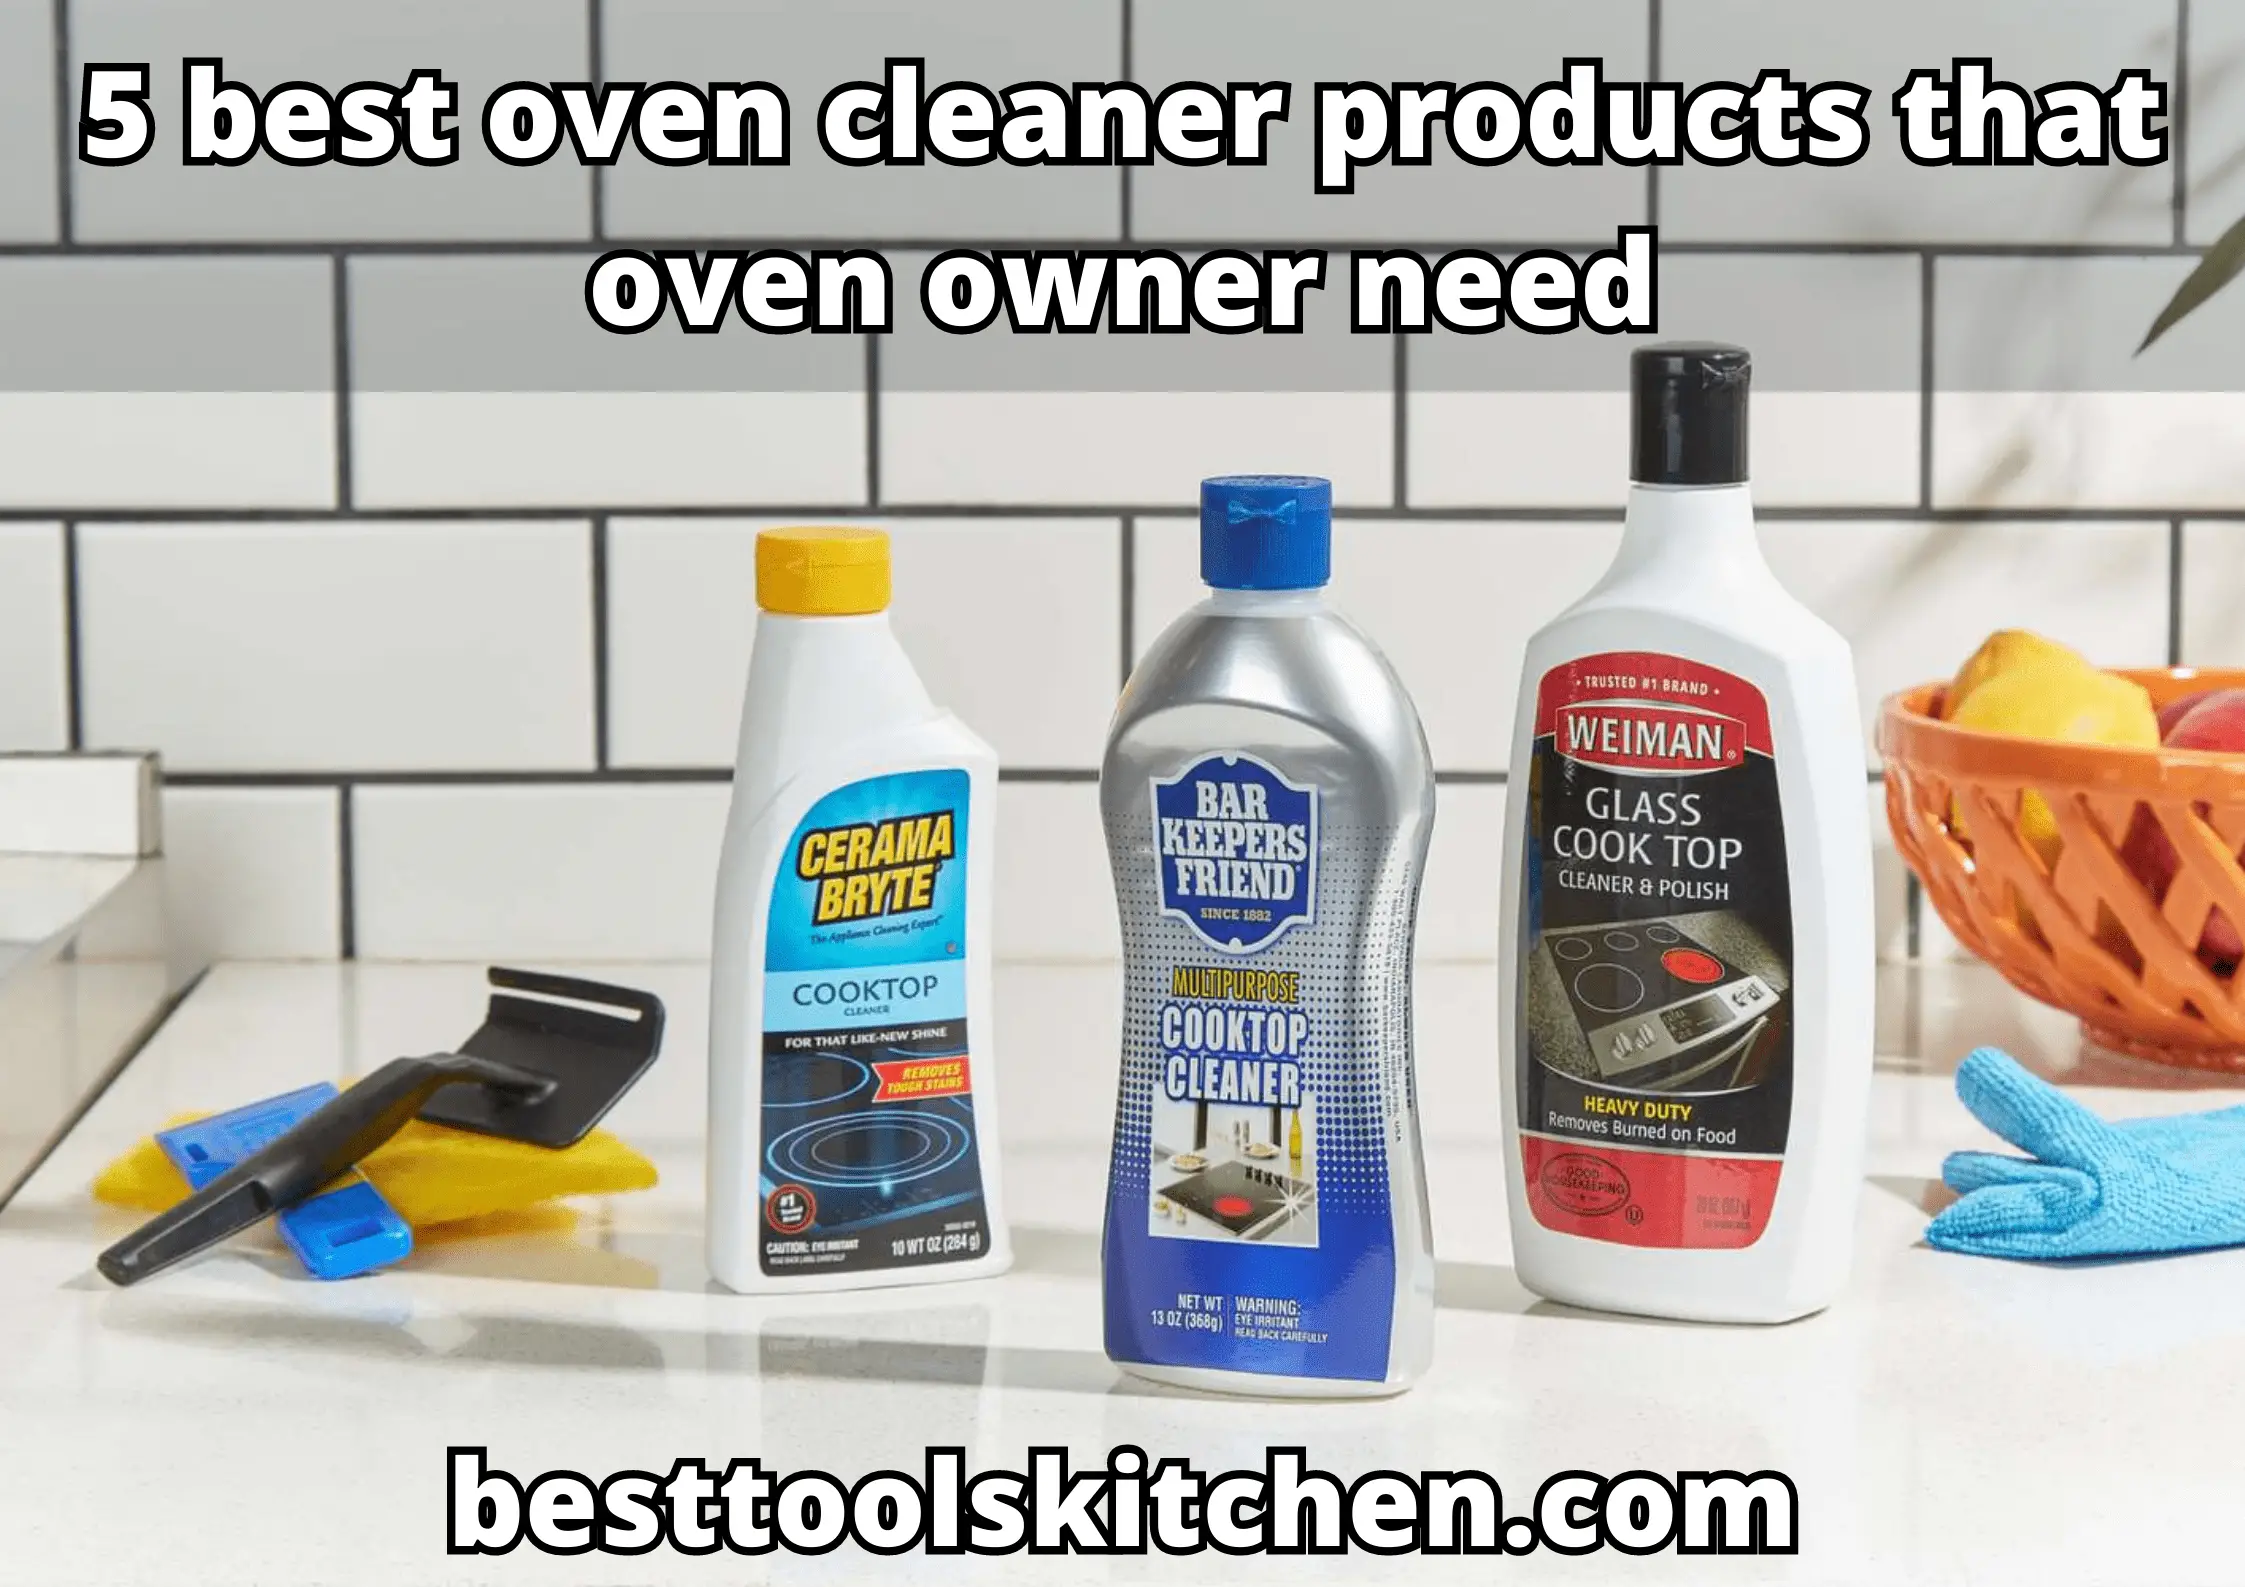 5 best oven cleaner products that oven owner need